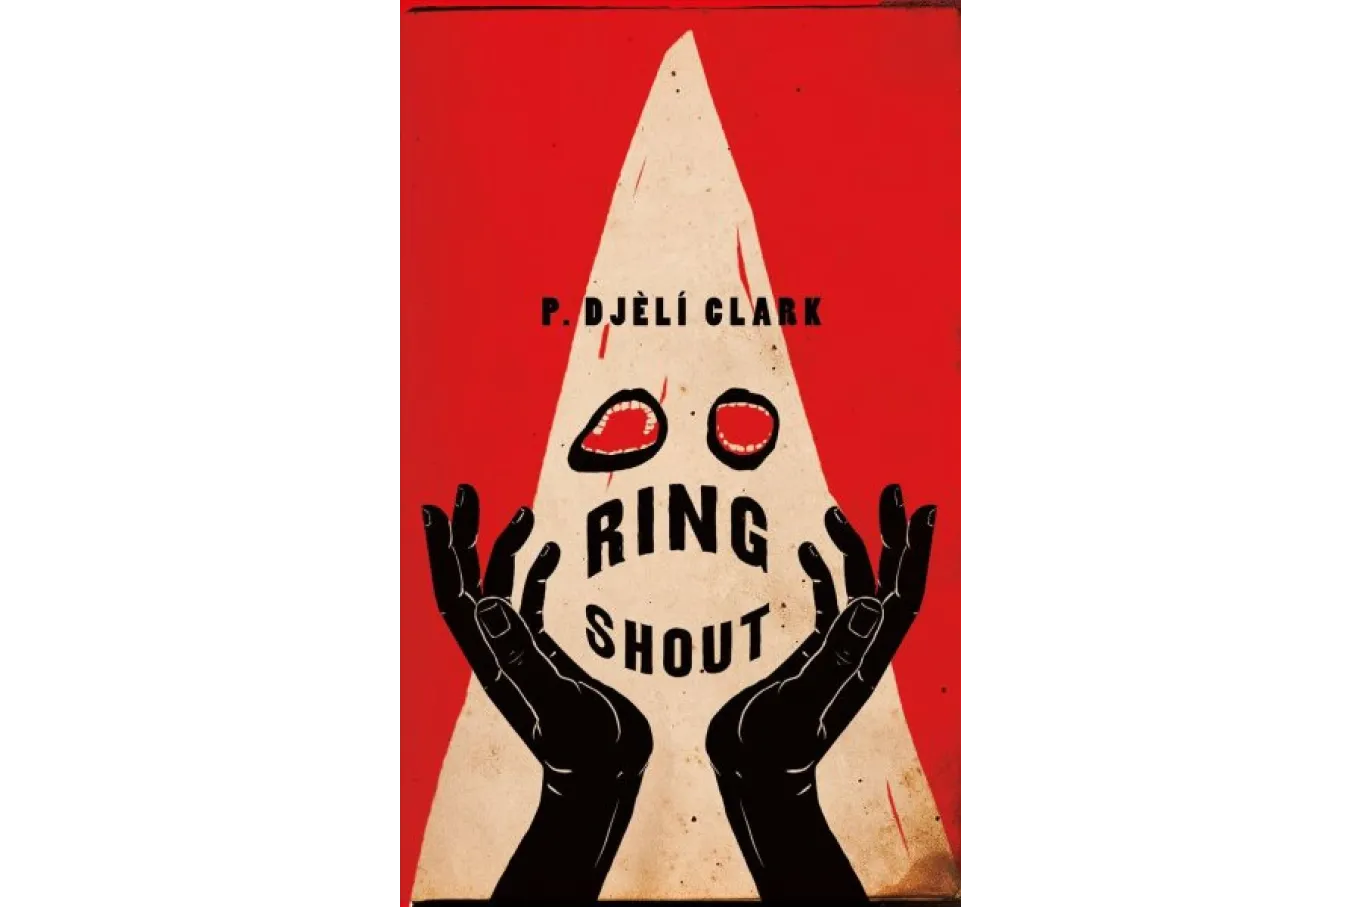 Cover image - a white Ku Klux Klan hood with screaming mouths for the eyeholes against a blood red background. A pair of black hands are upraised in front of the mask.